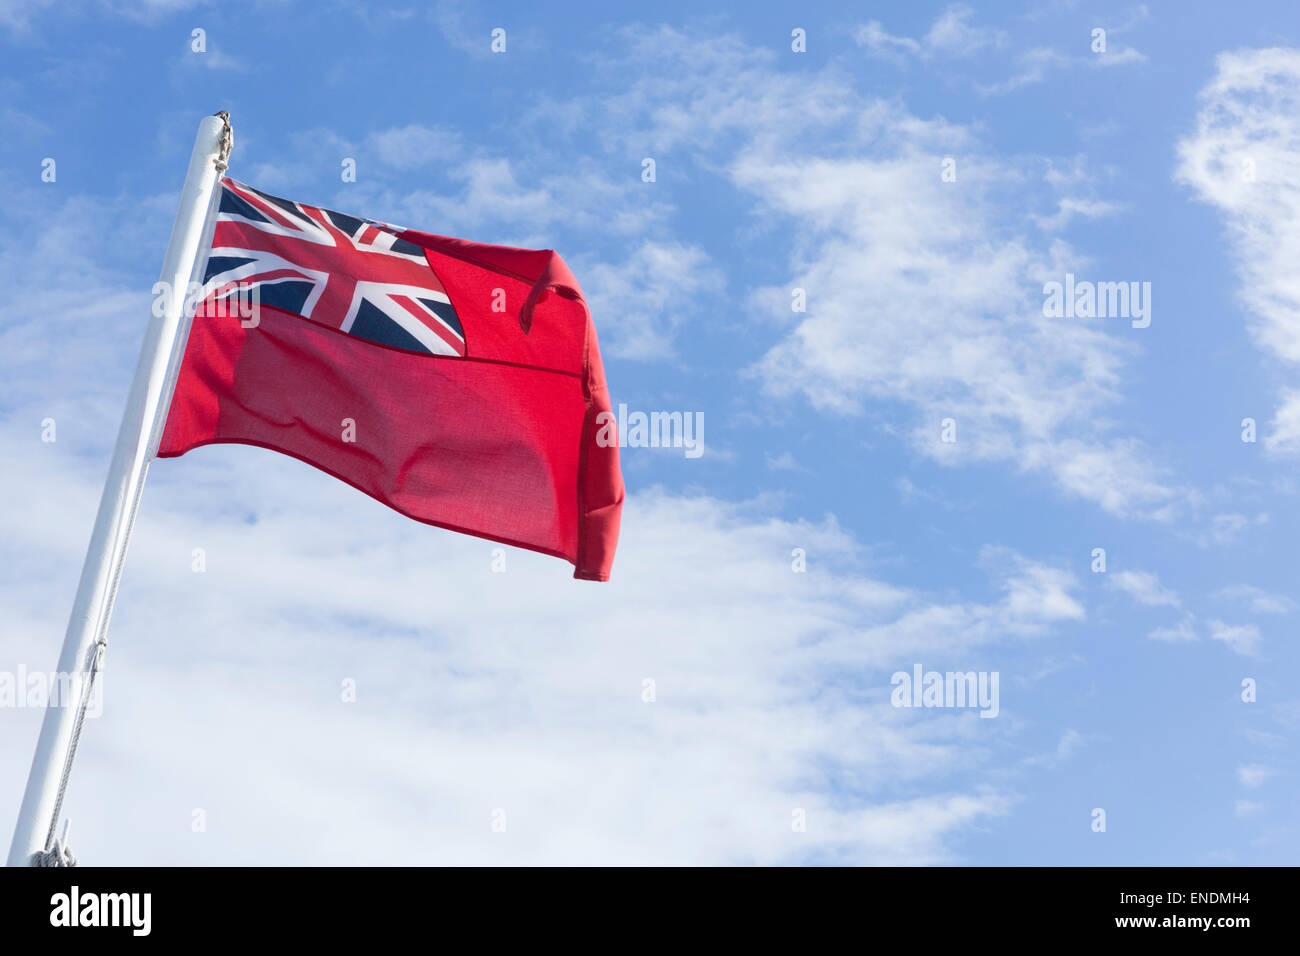 A Red Ensign Flag flying in a blue sky with white clouds Stock Photo